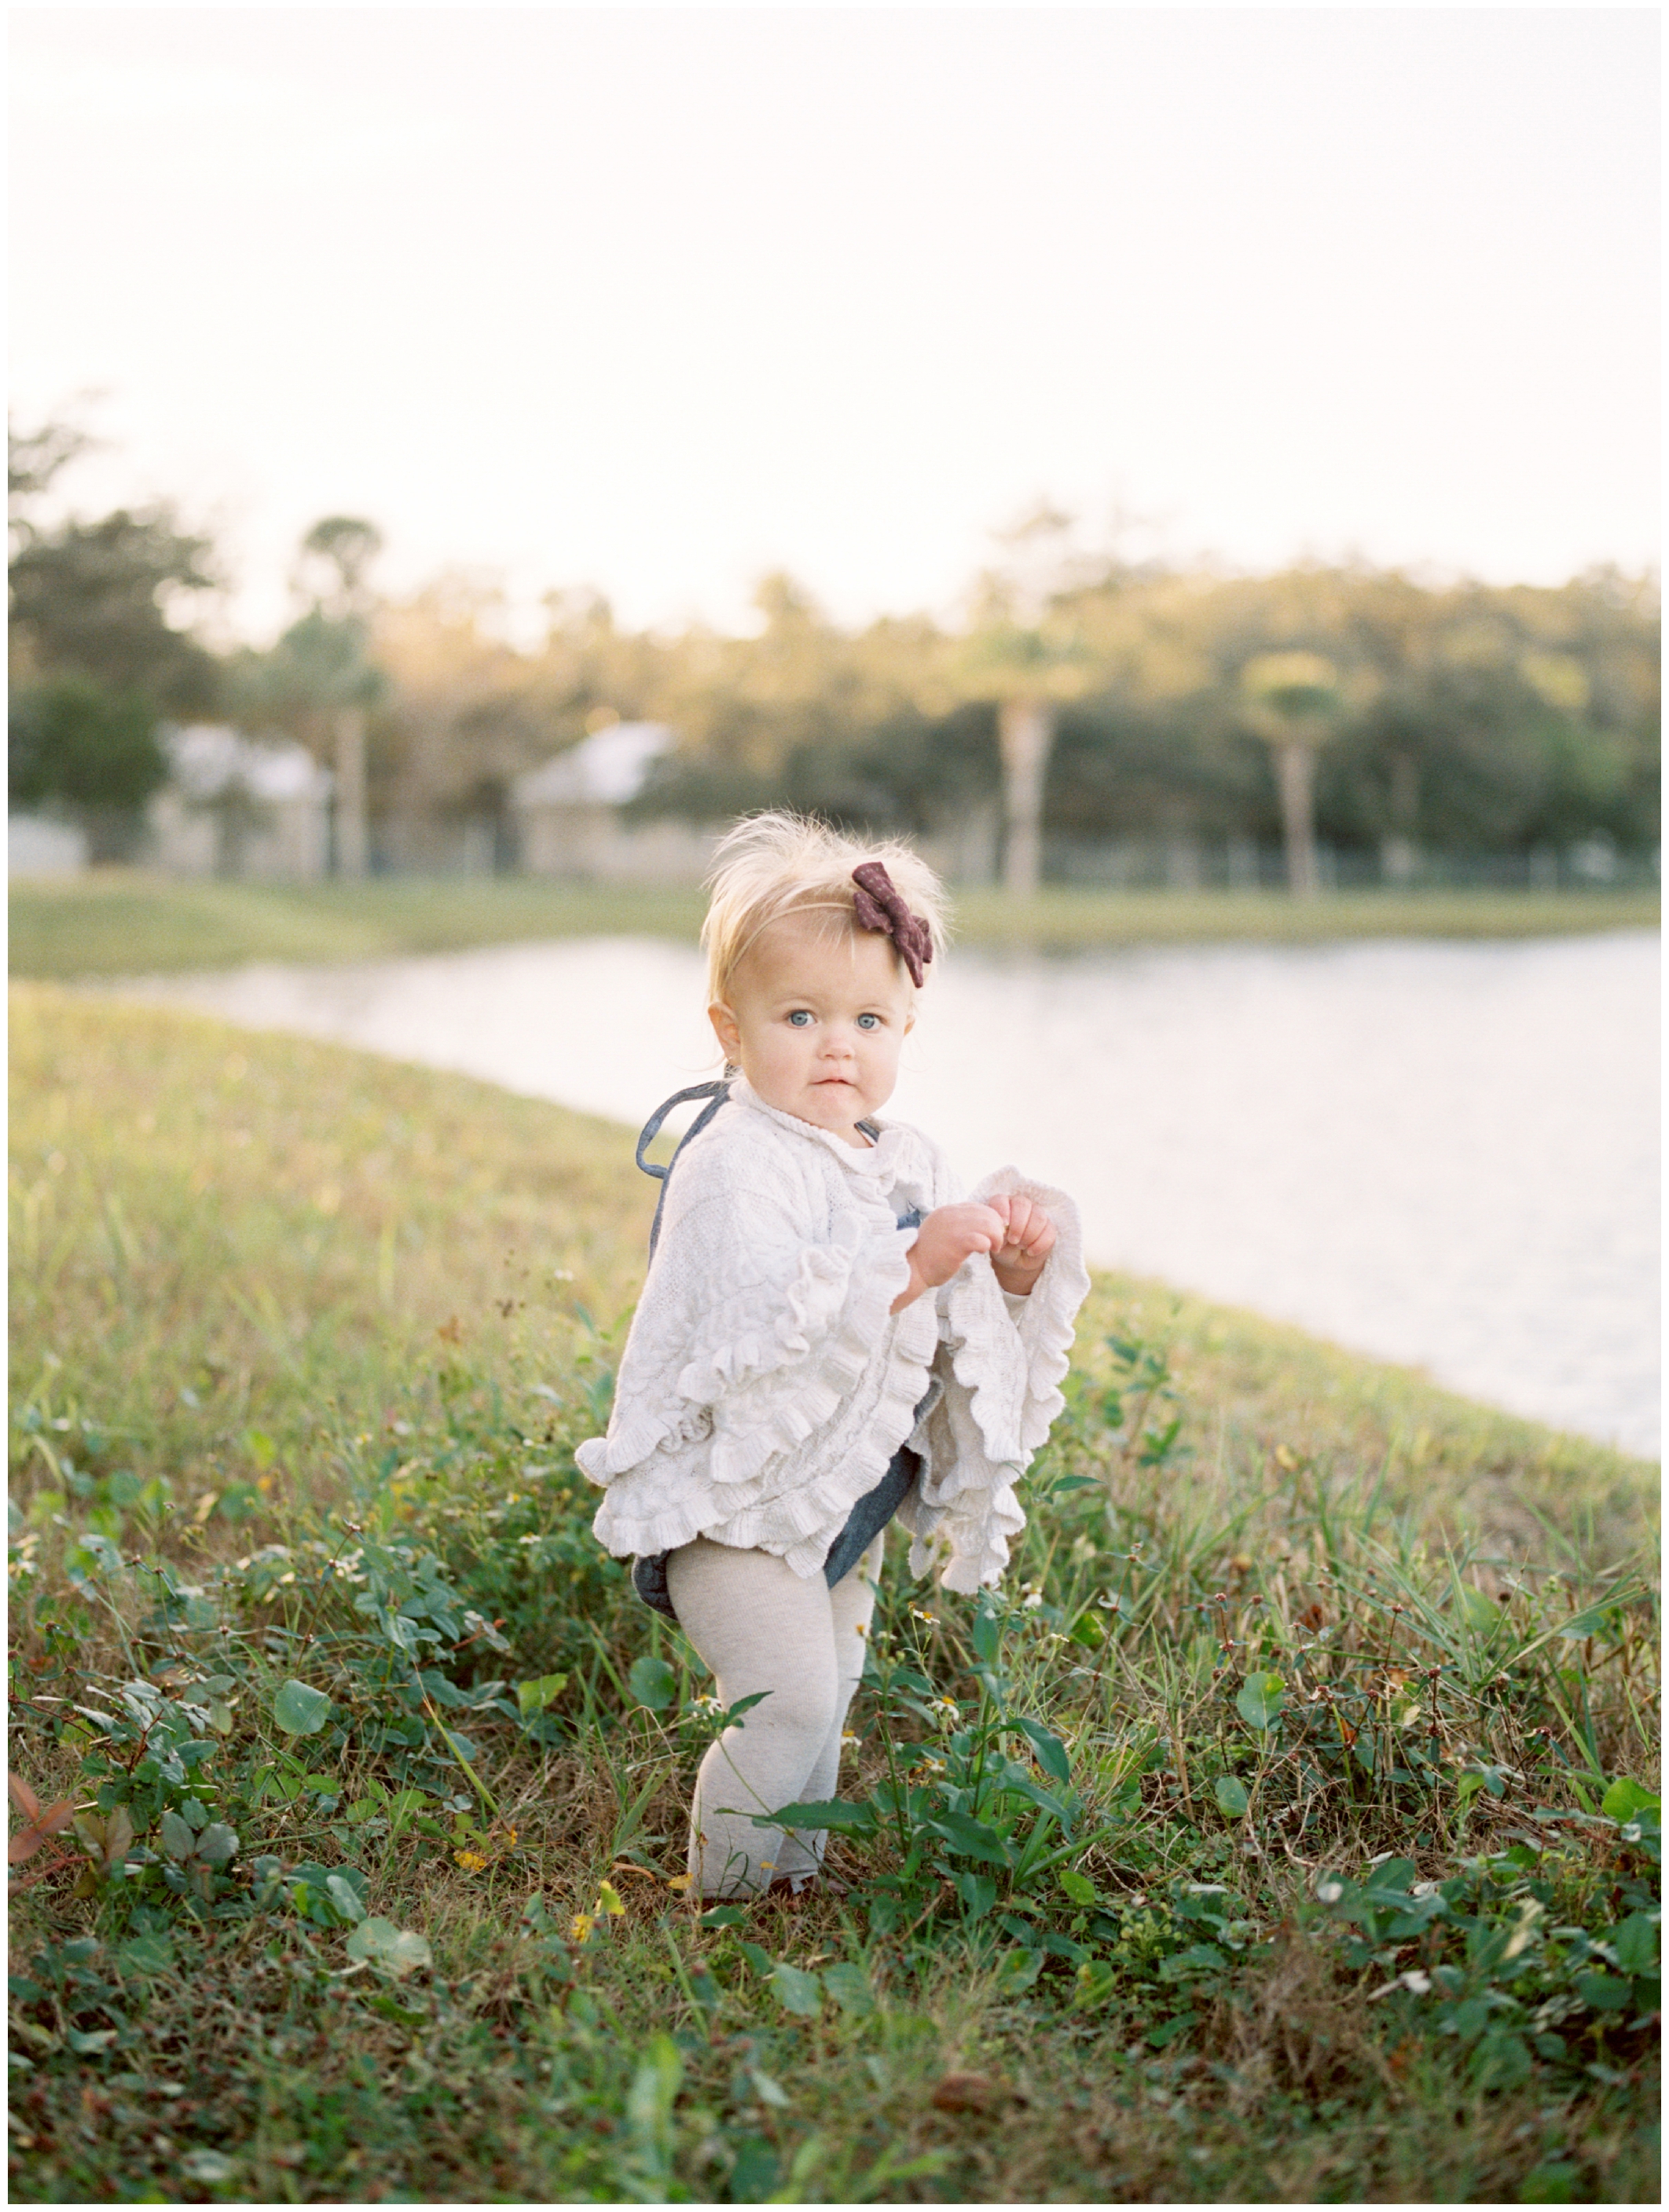 Lisa Silva Photography- Ponte Vedra Beach, St. Augustine and Jacksonville, Florida Fine Art Film Destination Wedding Photography- Family Lifestyle Session in St. Augustine_0013.jpg